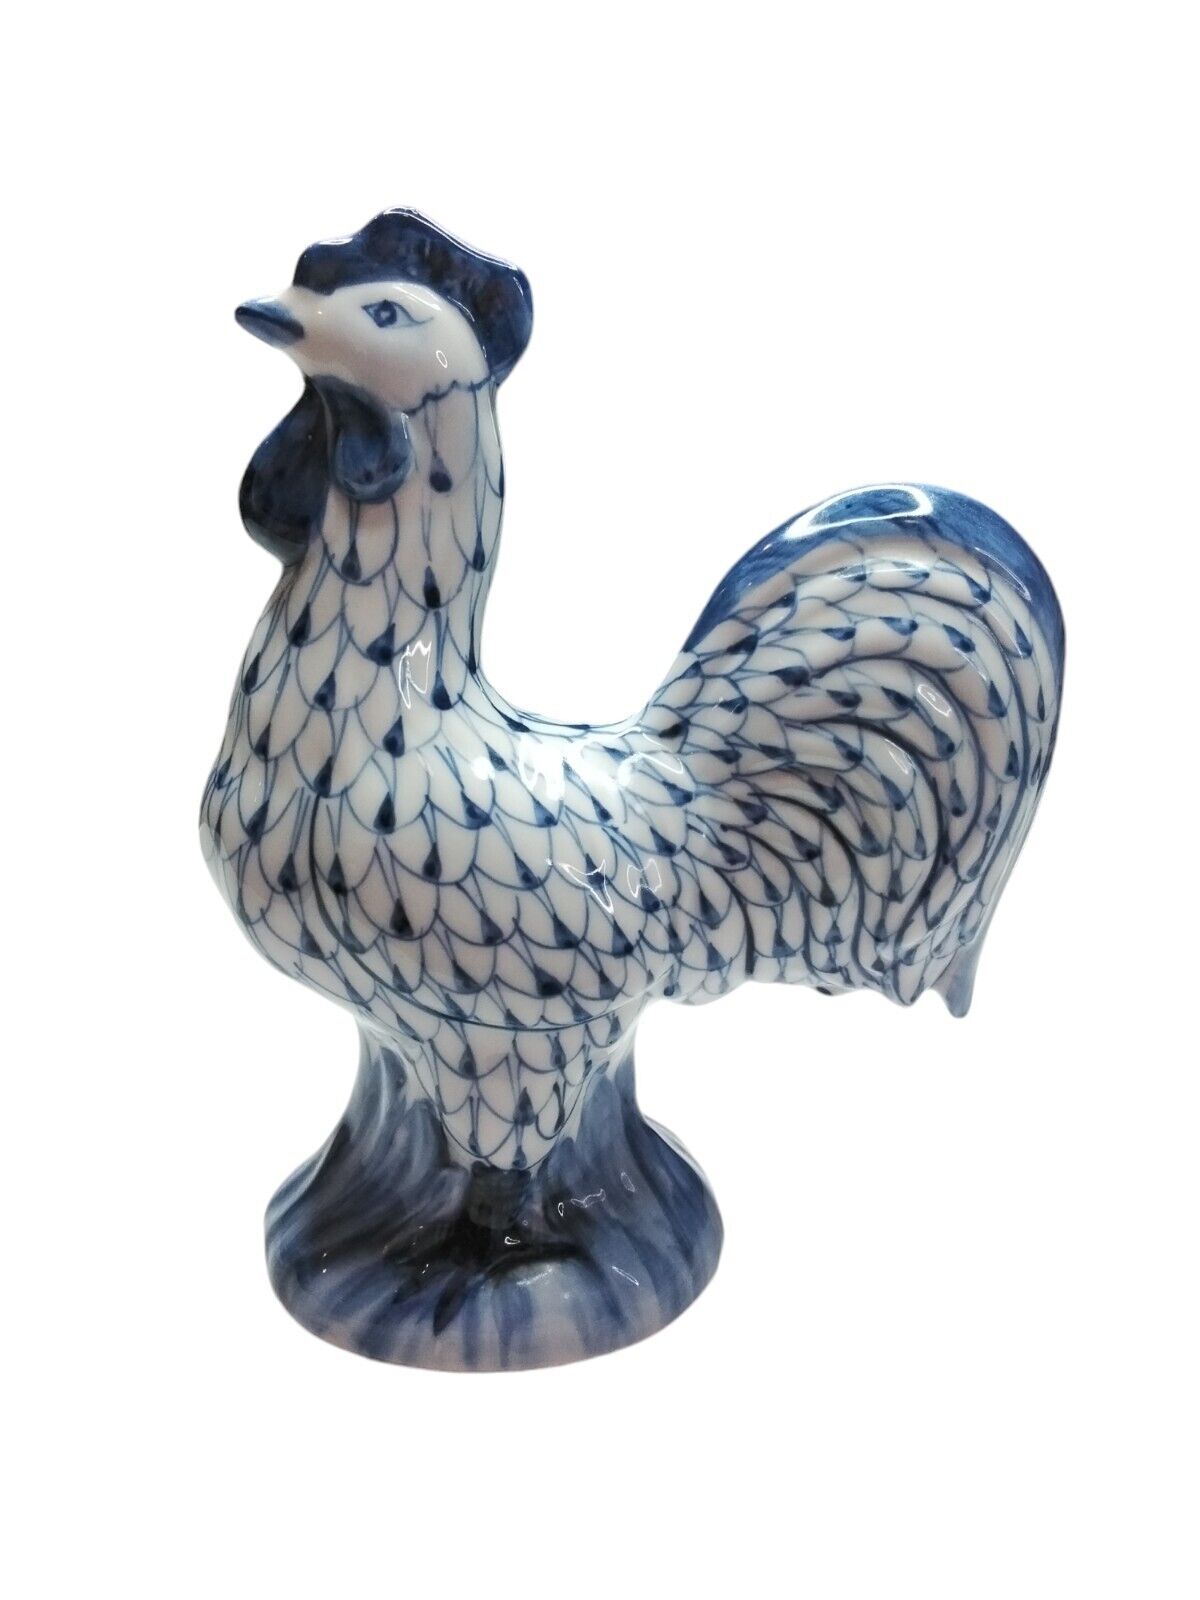 Ceramic Rooster Blue and White Hand Painted 7.5 inches tall